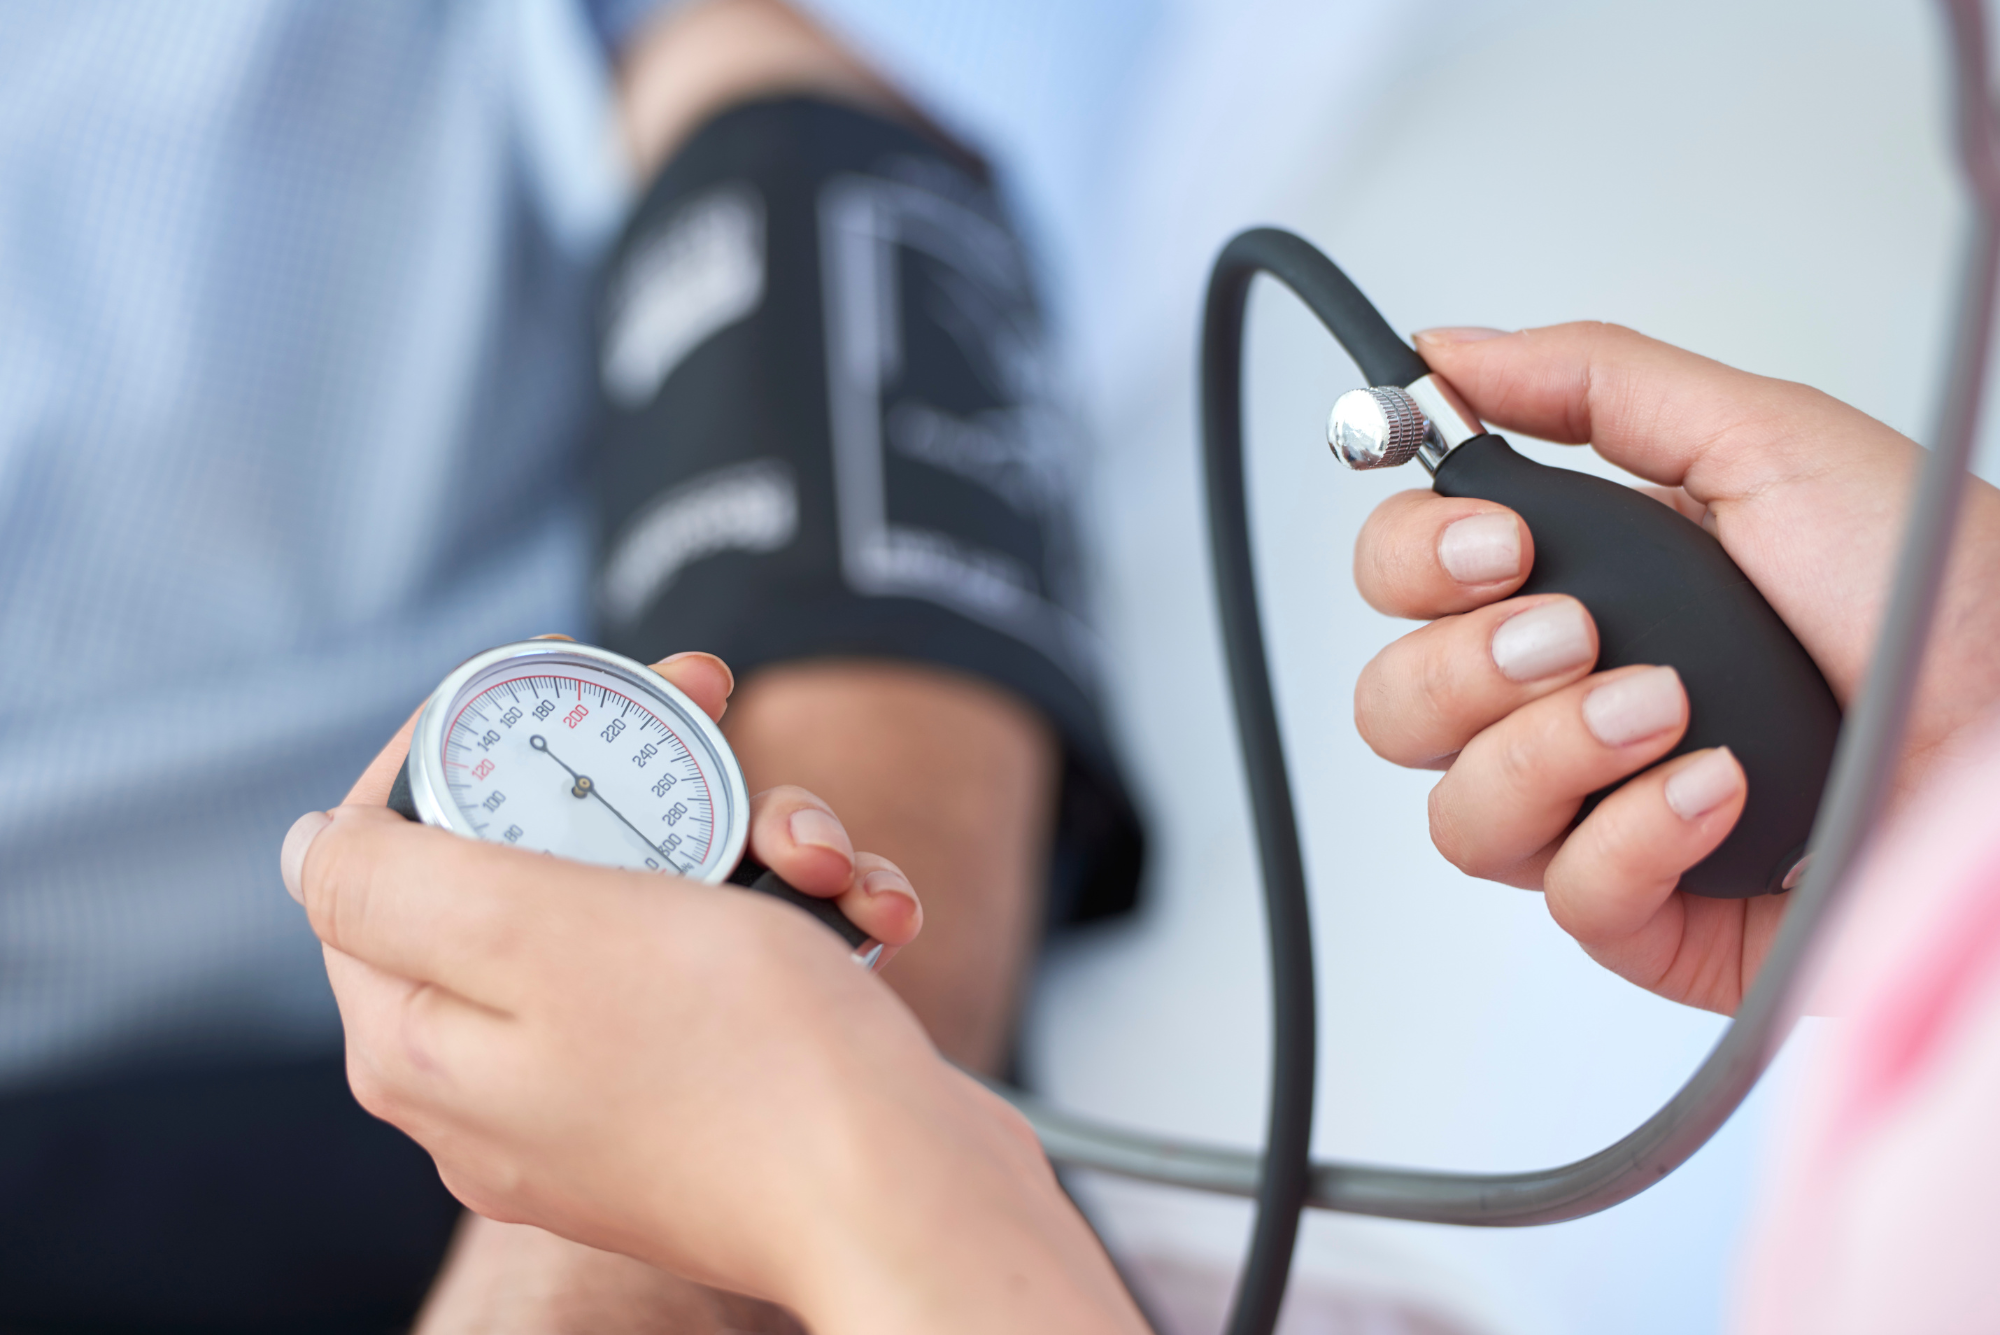 What Is Considered High Blood Pressure? (Plus What to Do)